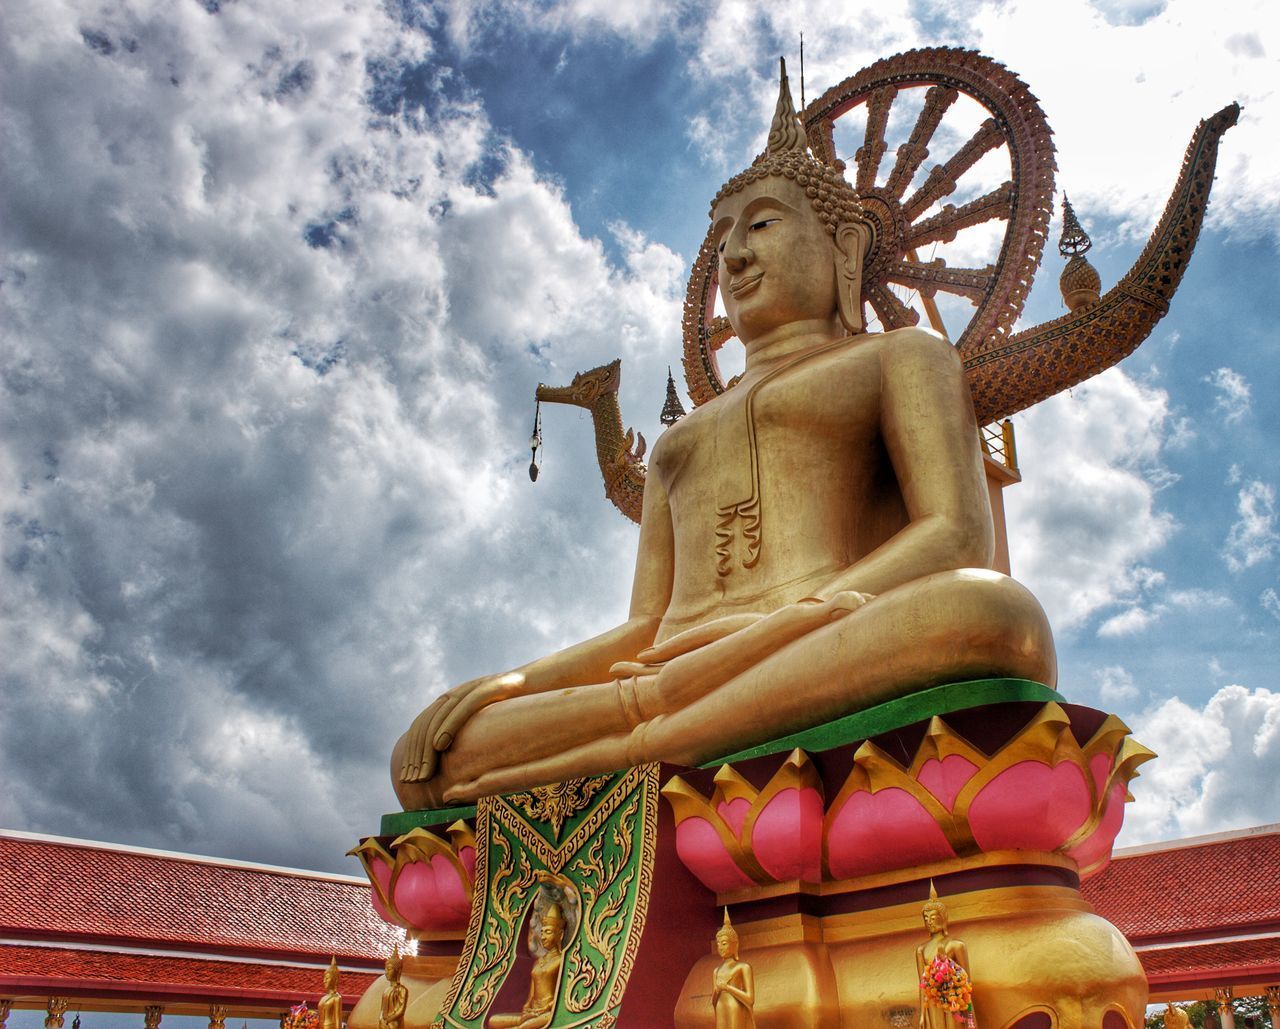 LOW ANGLE VIEW OF STATUE OF BUDDHA AGAINST SKY